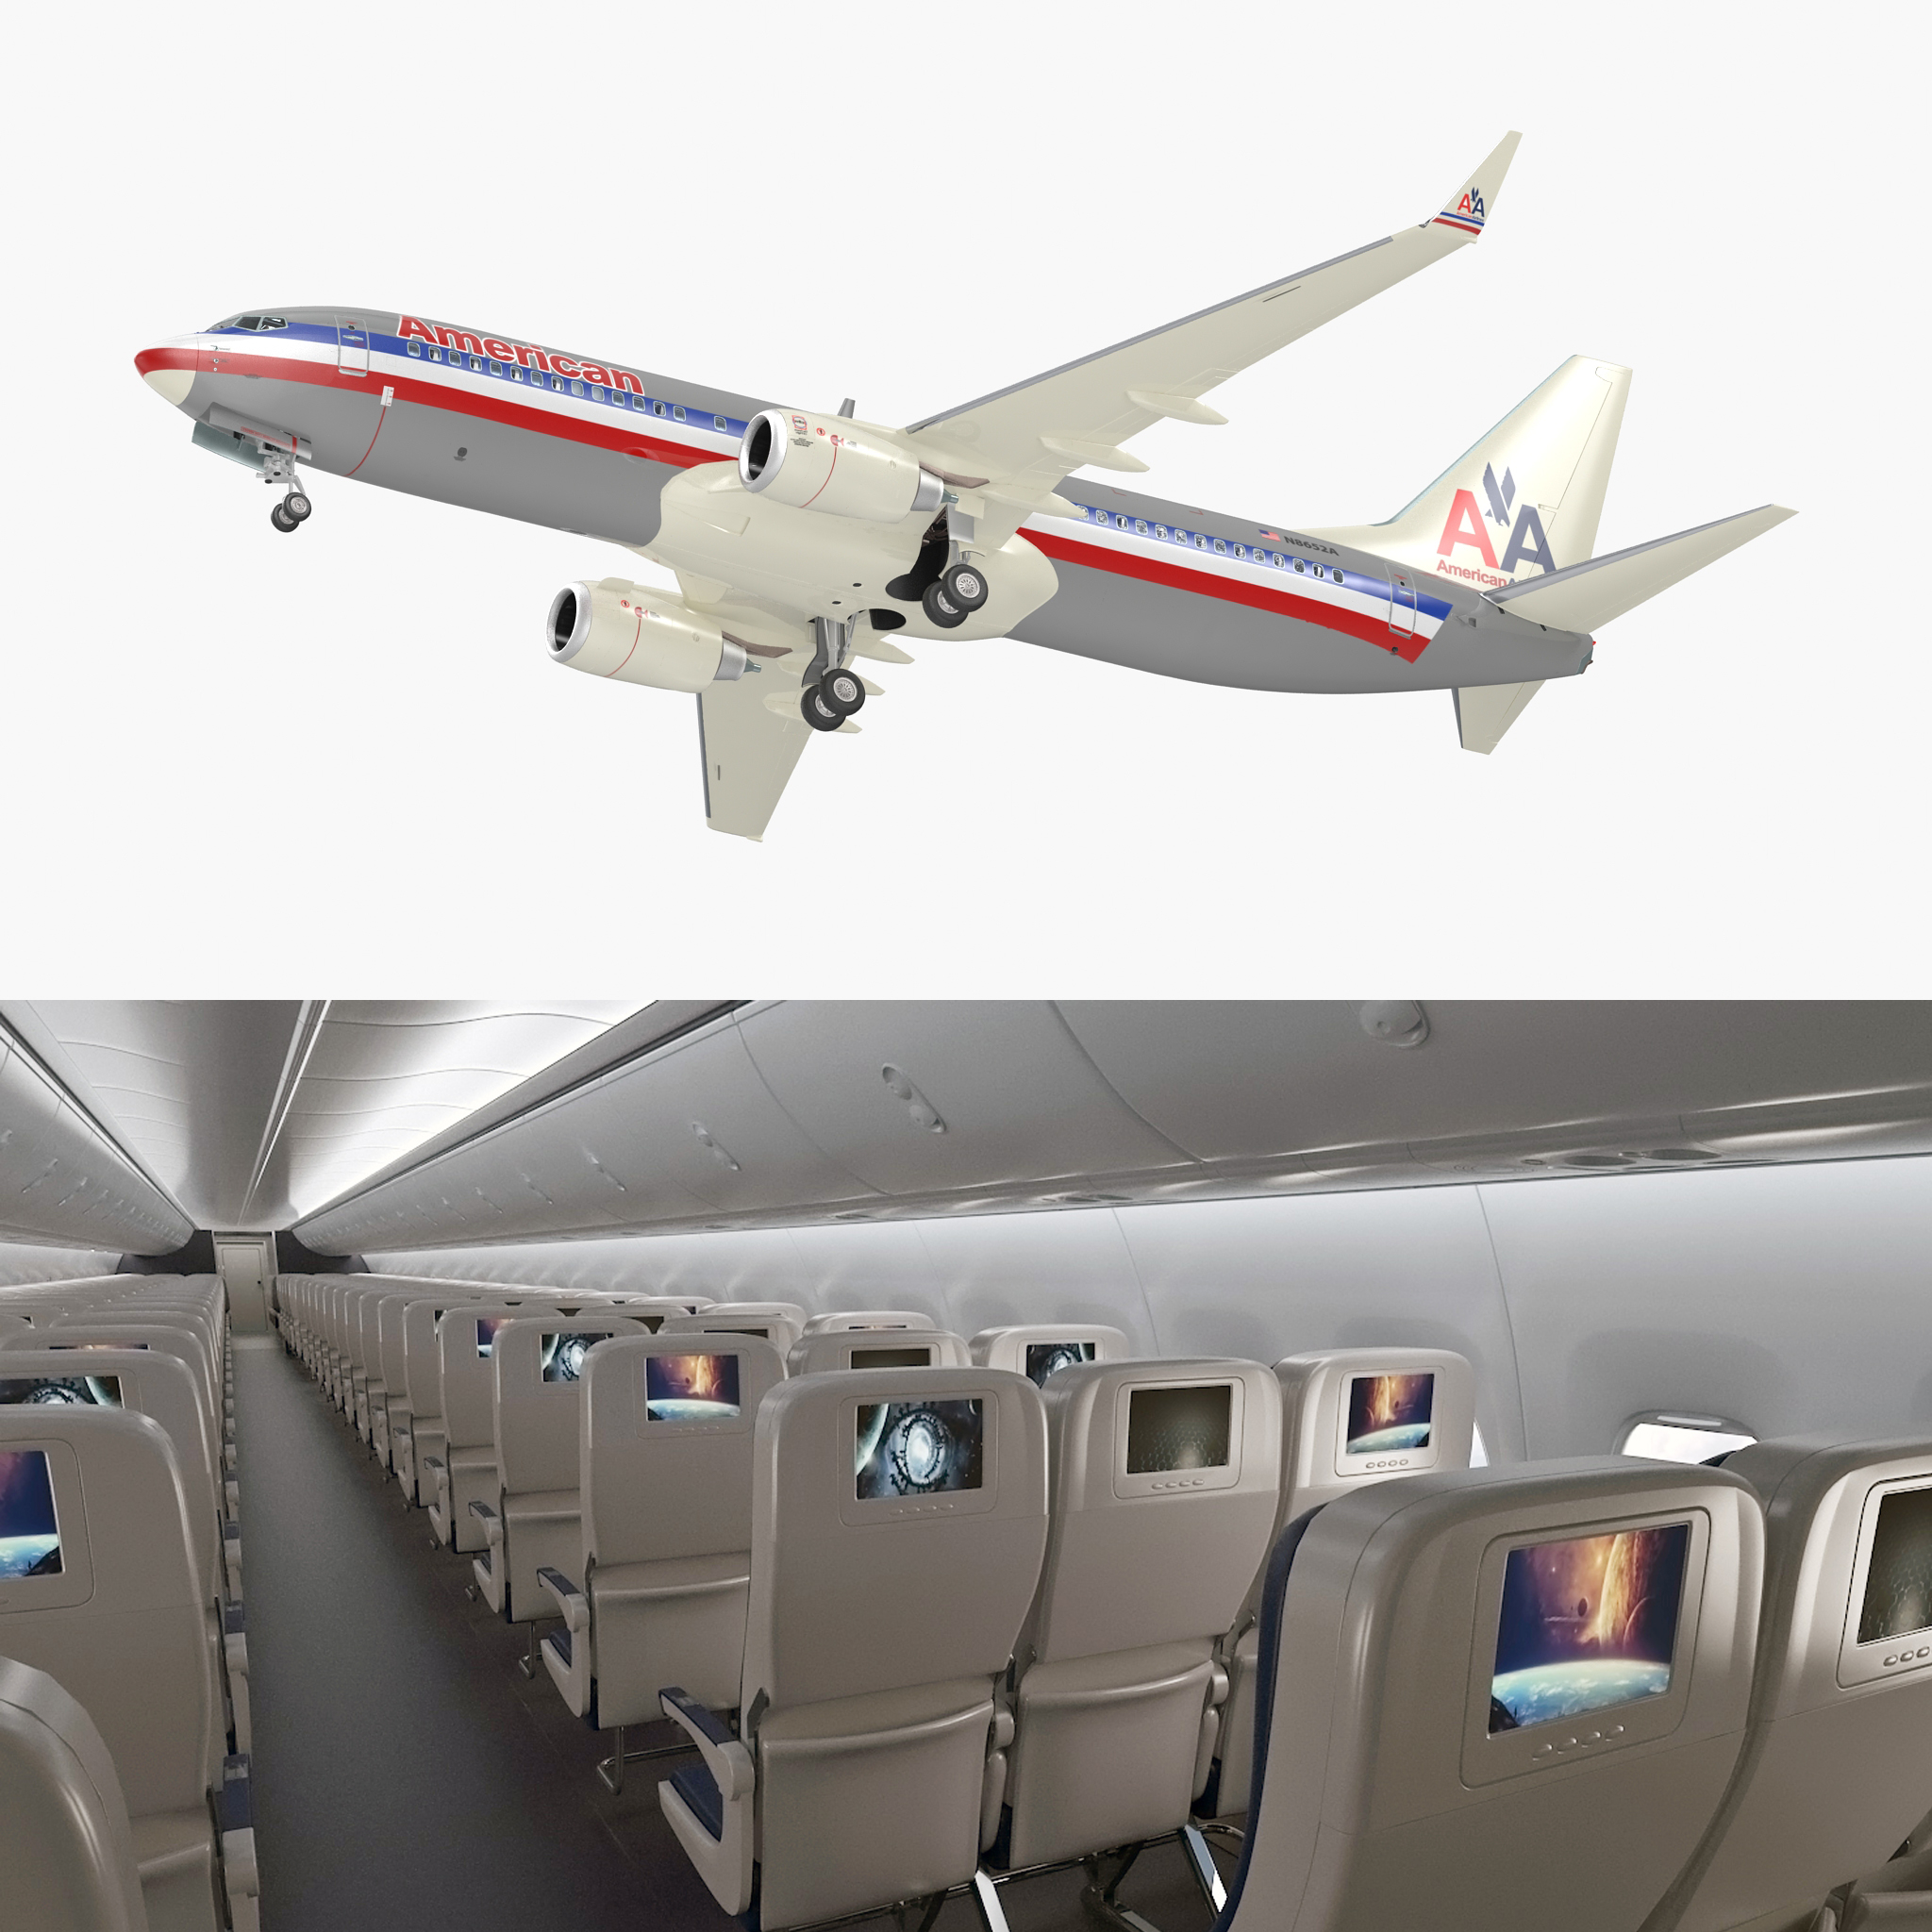 All 98+ Images american airlines boeing 737-800 interior Full HD, 2k, 4k